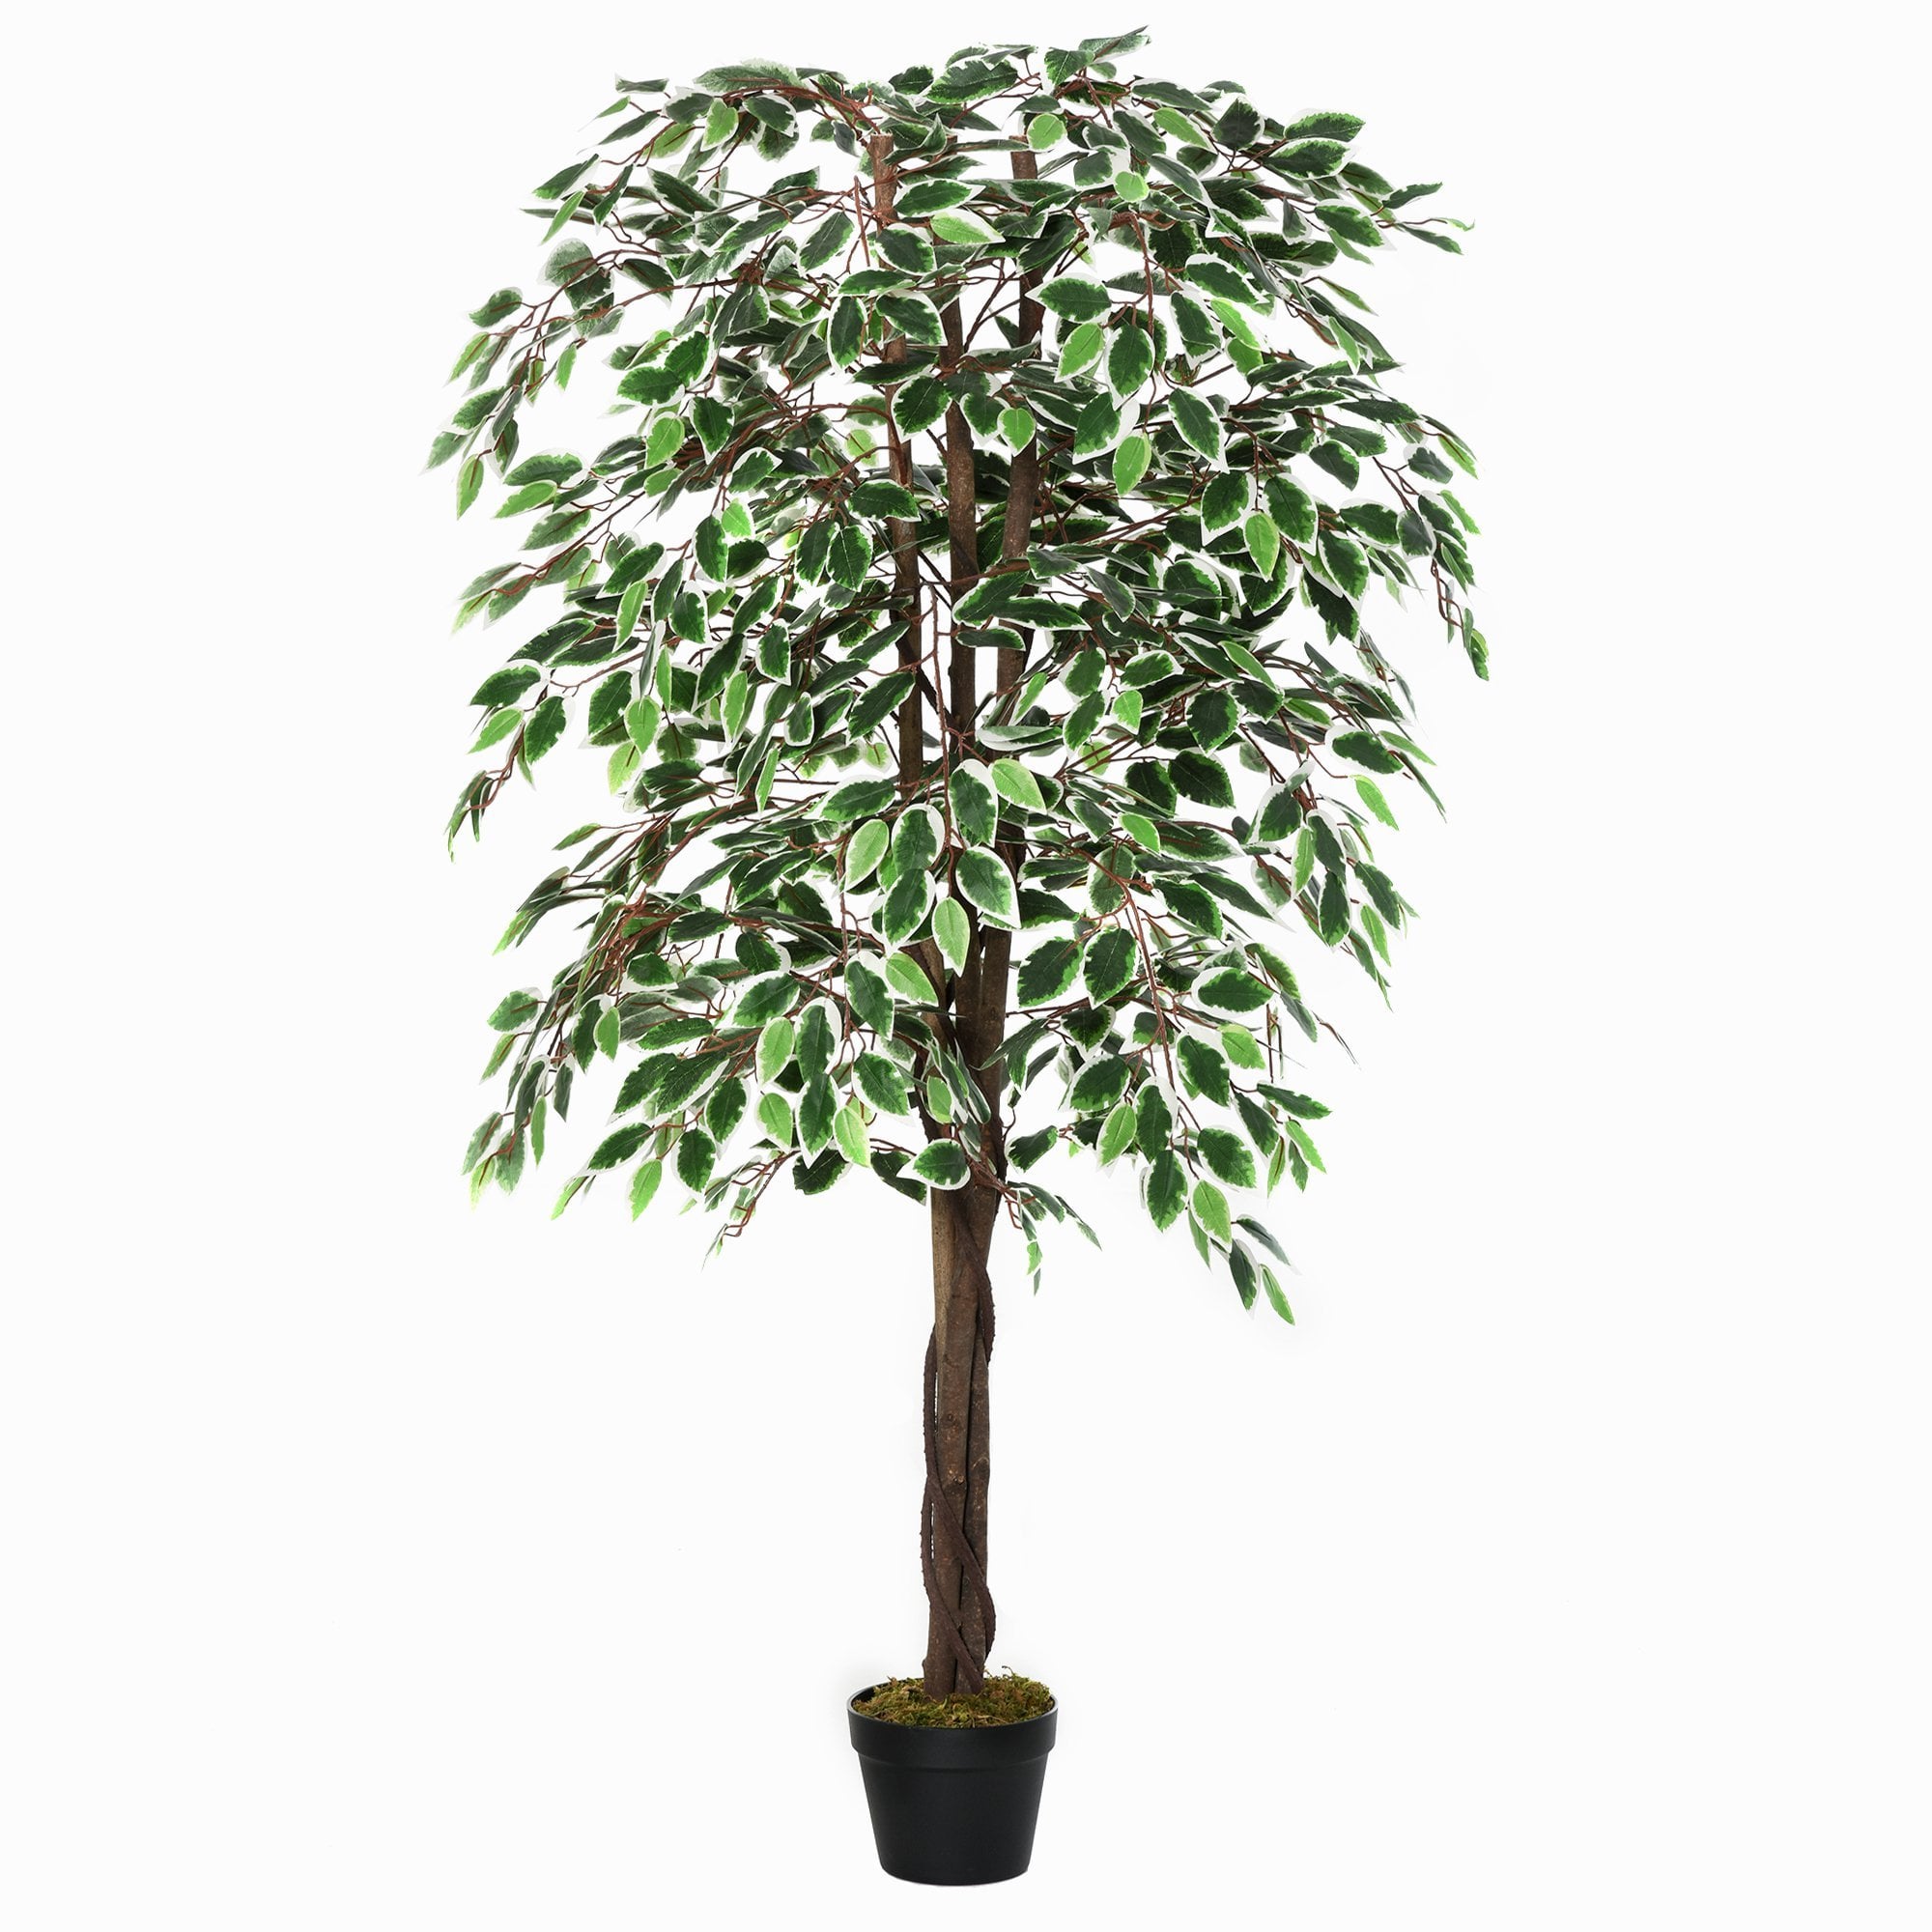 Outsunny Artificial Ficus Silk Tree with Nursery Pot - Decorative Fake Plant - for Indoor Outdoor D+cor - 160cm in Pot  | TJ Hughes